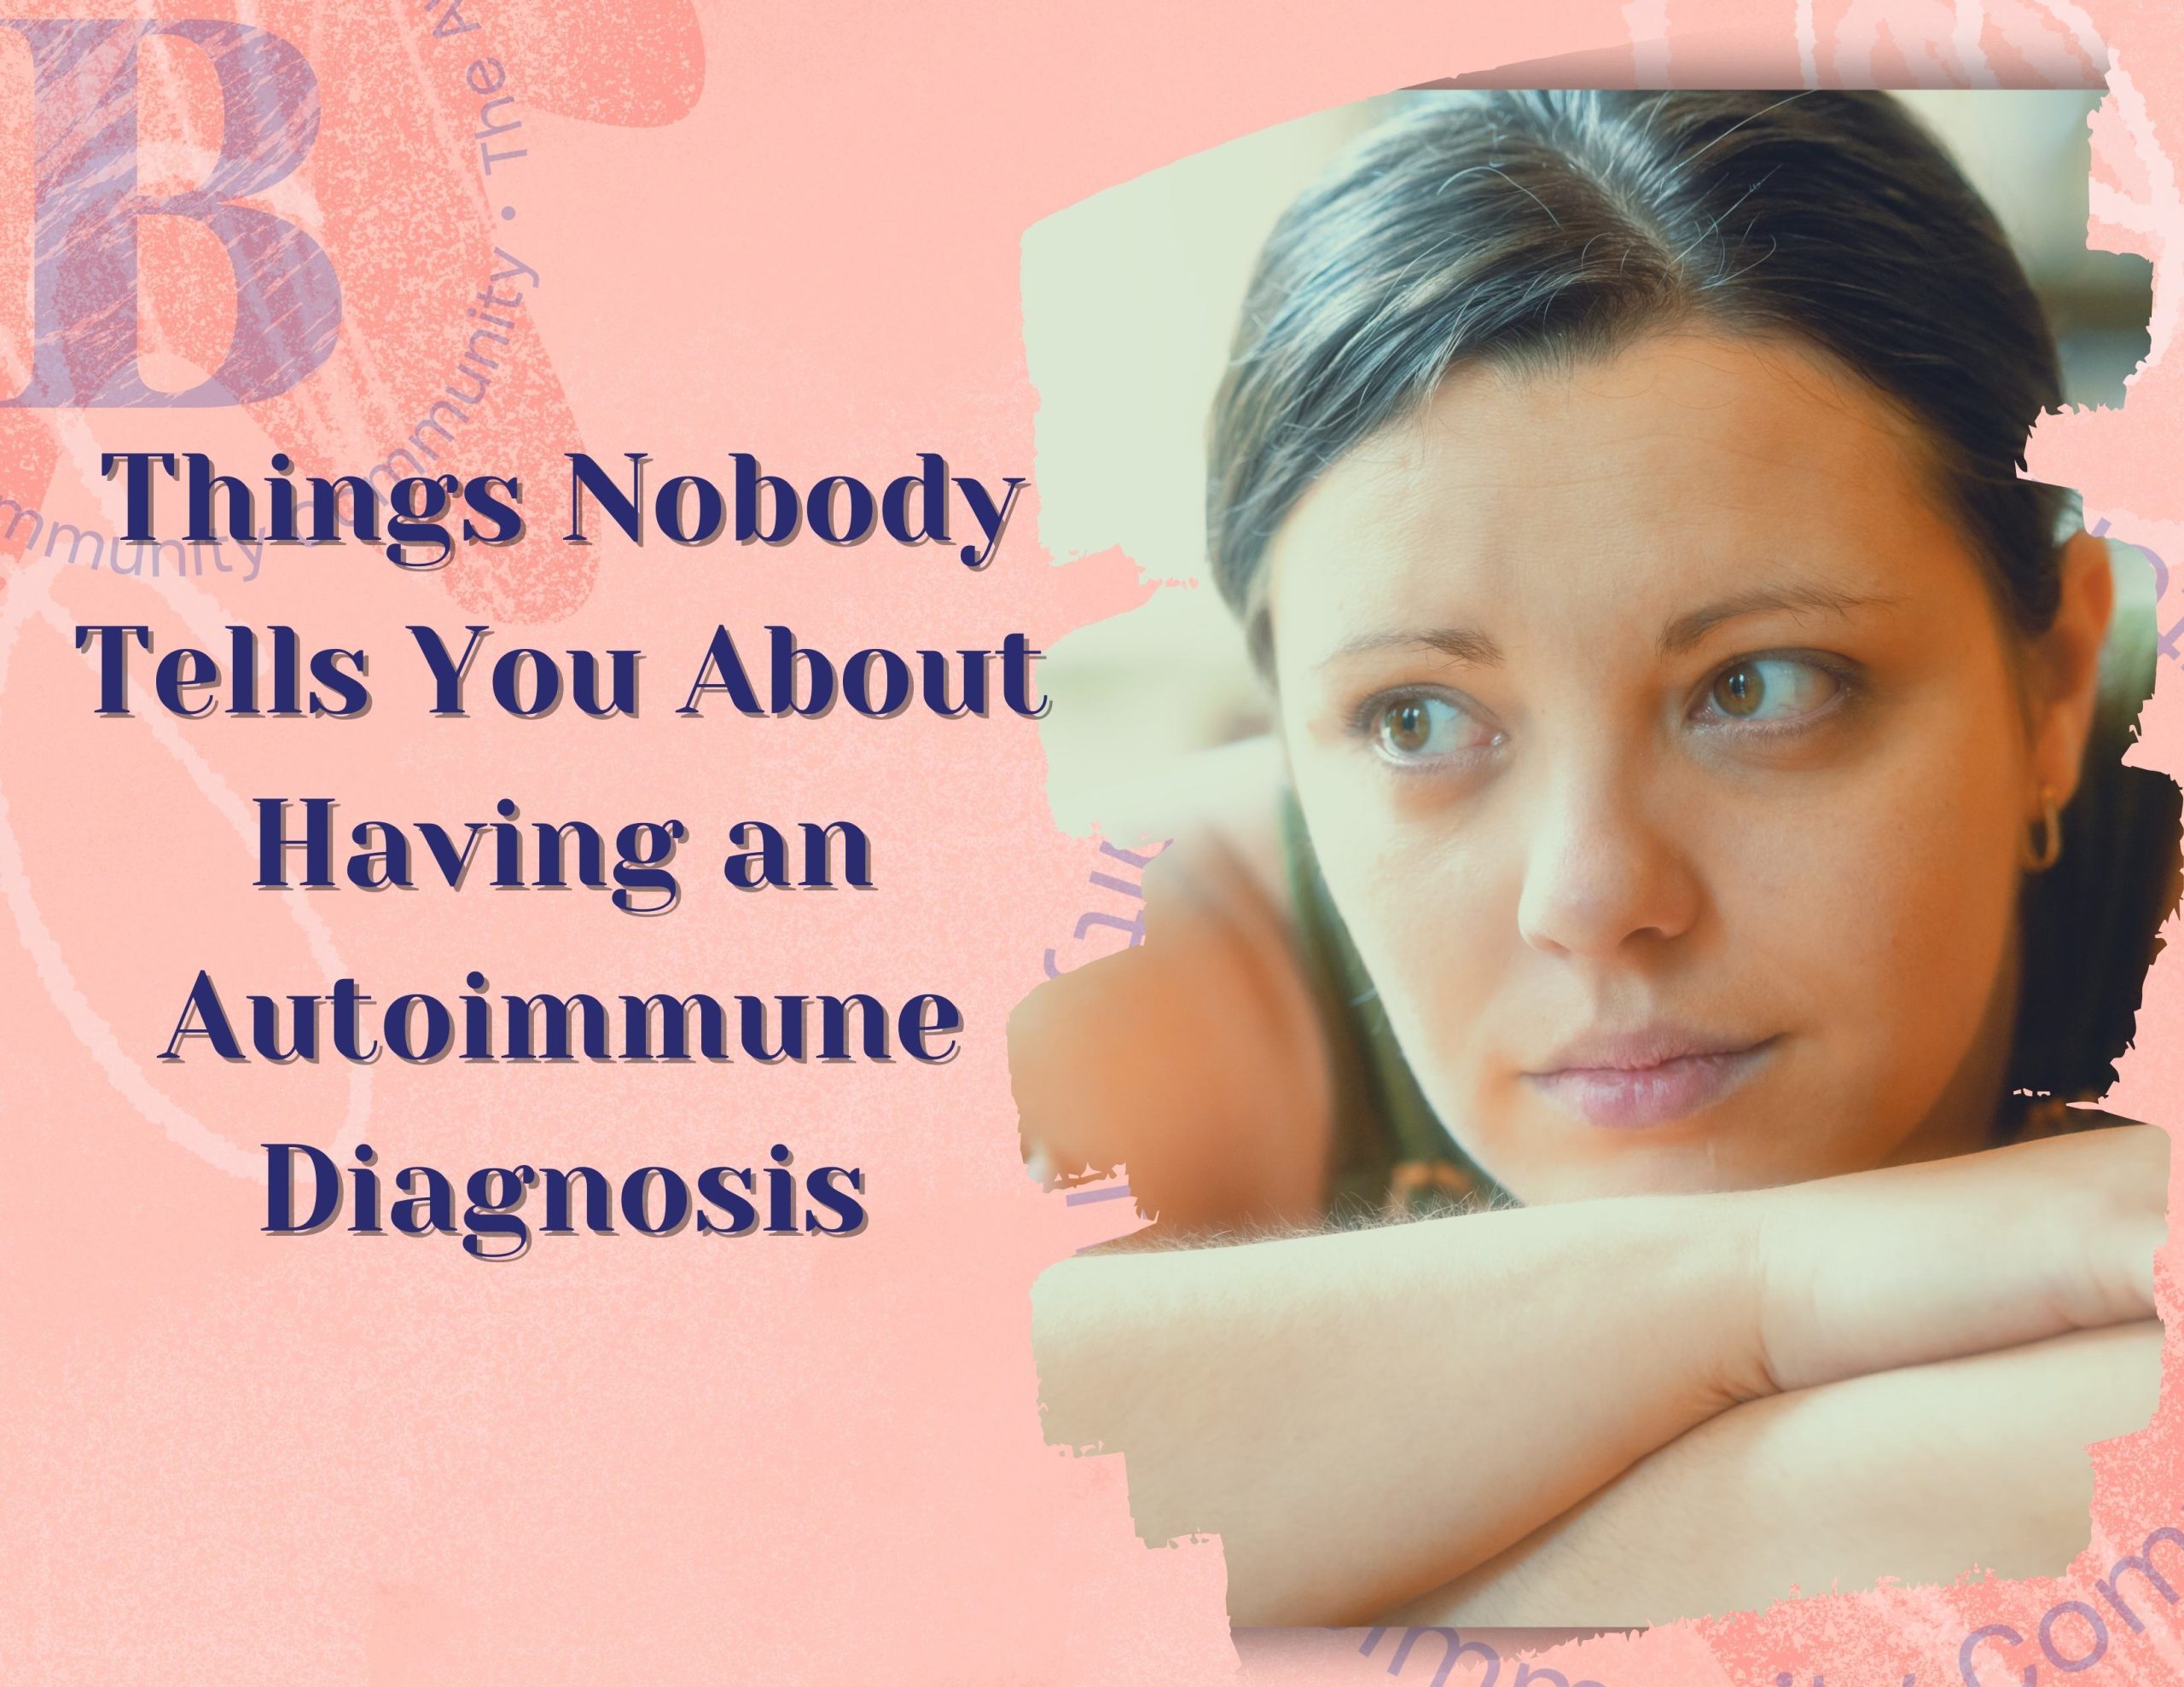 Things Nobody Tells You About Having an Autoimmune Diagnosis